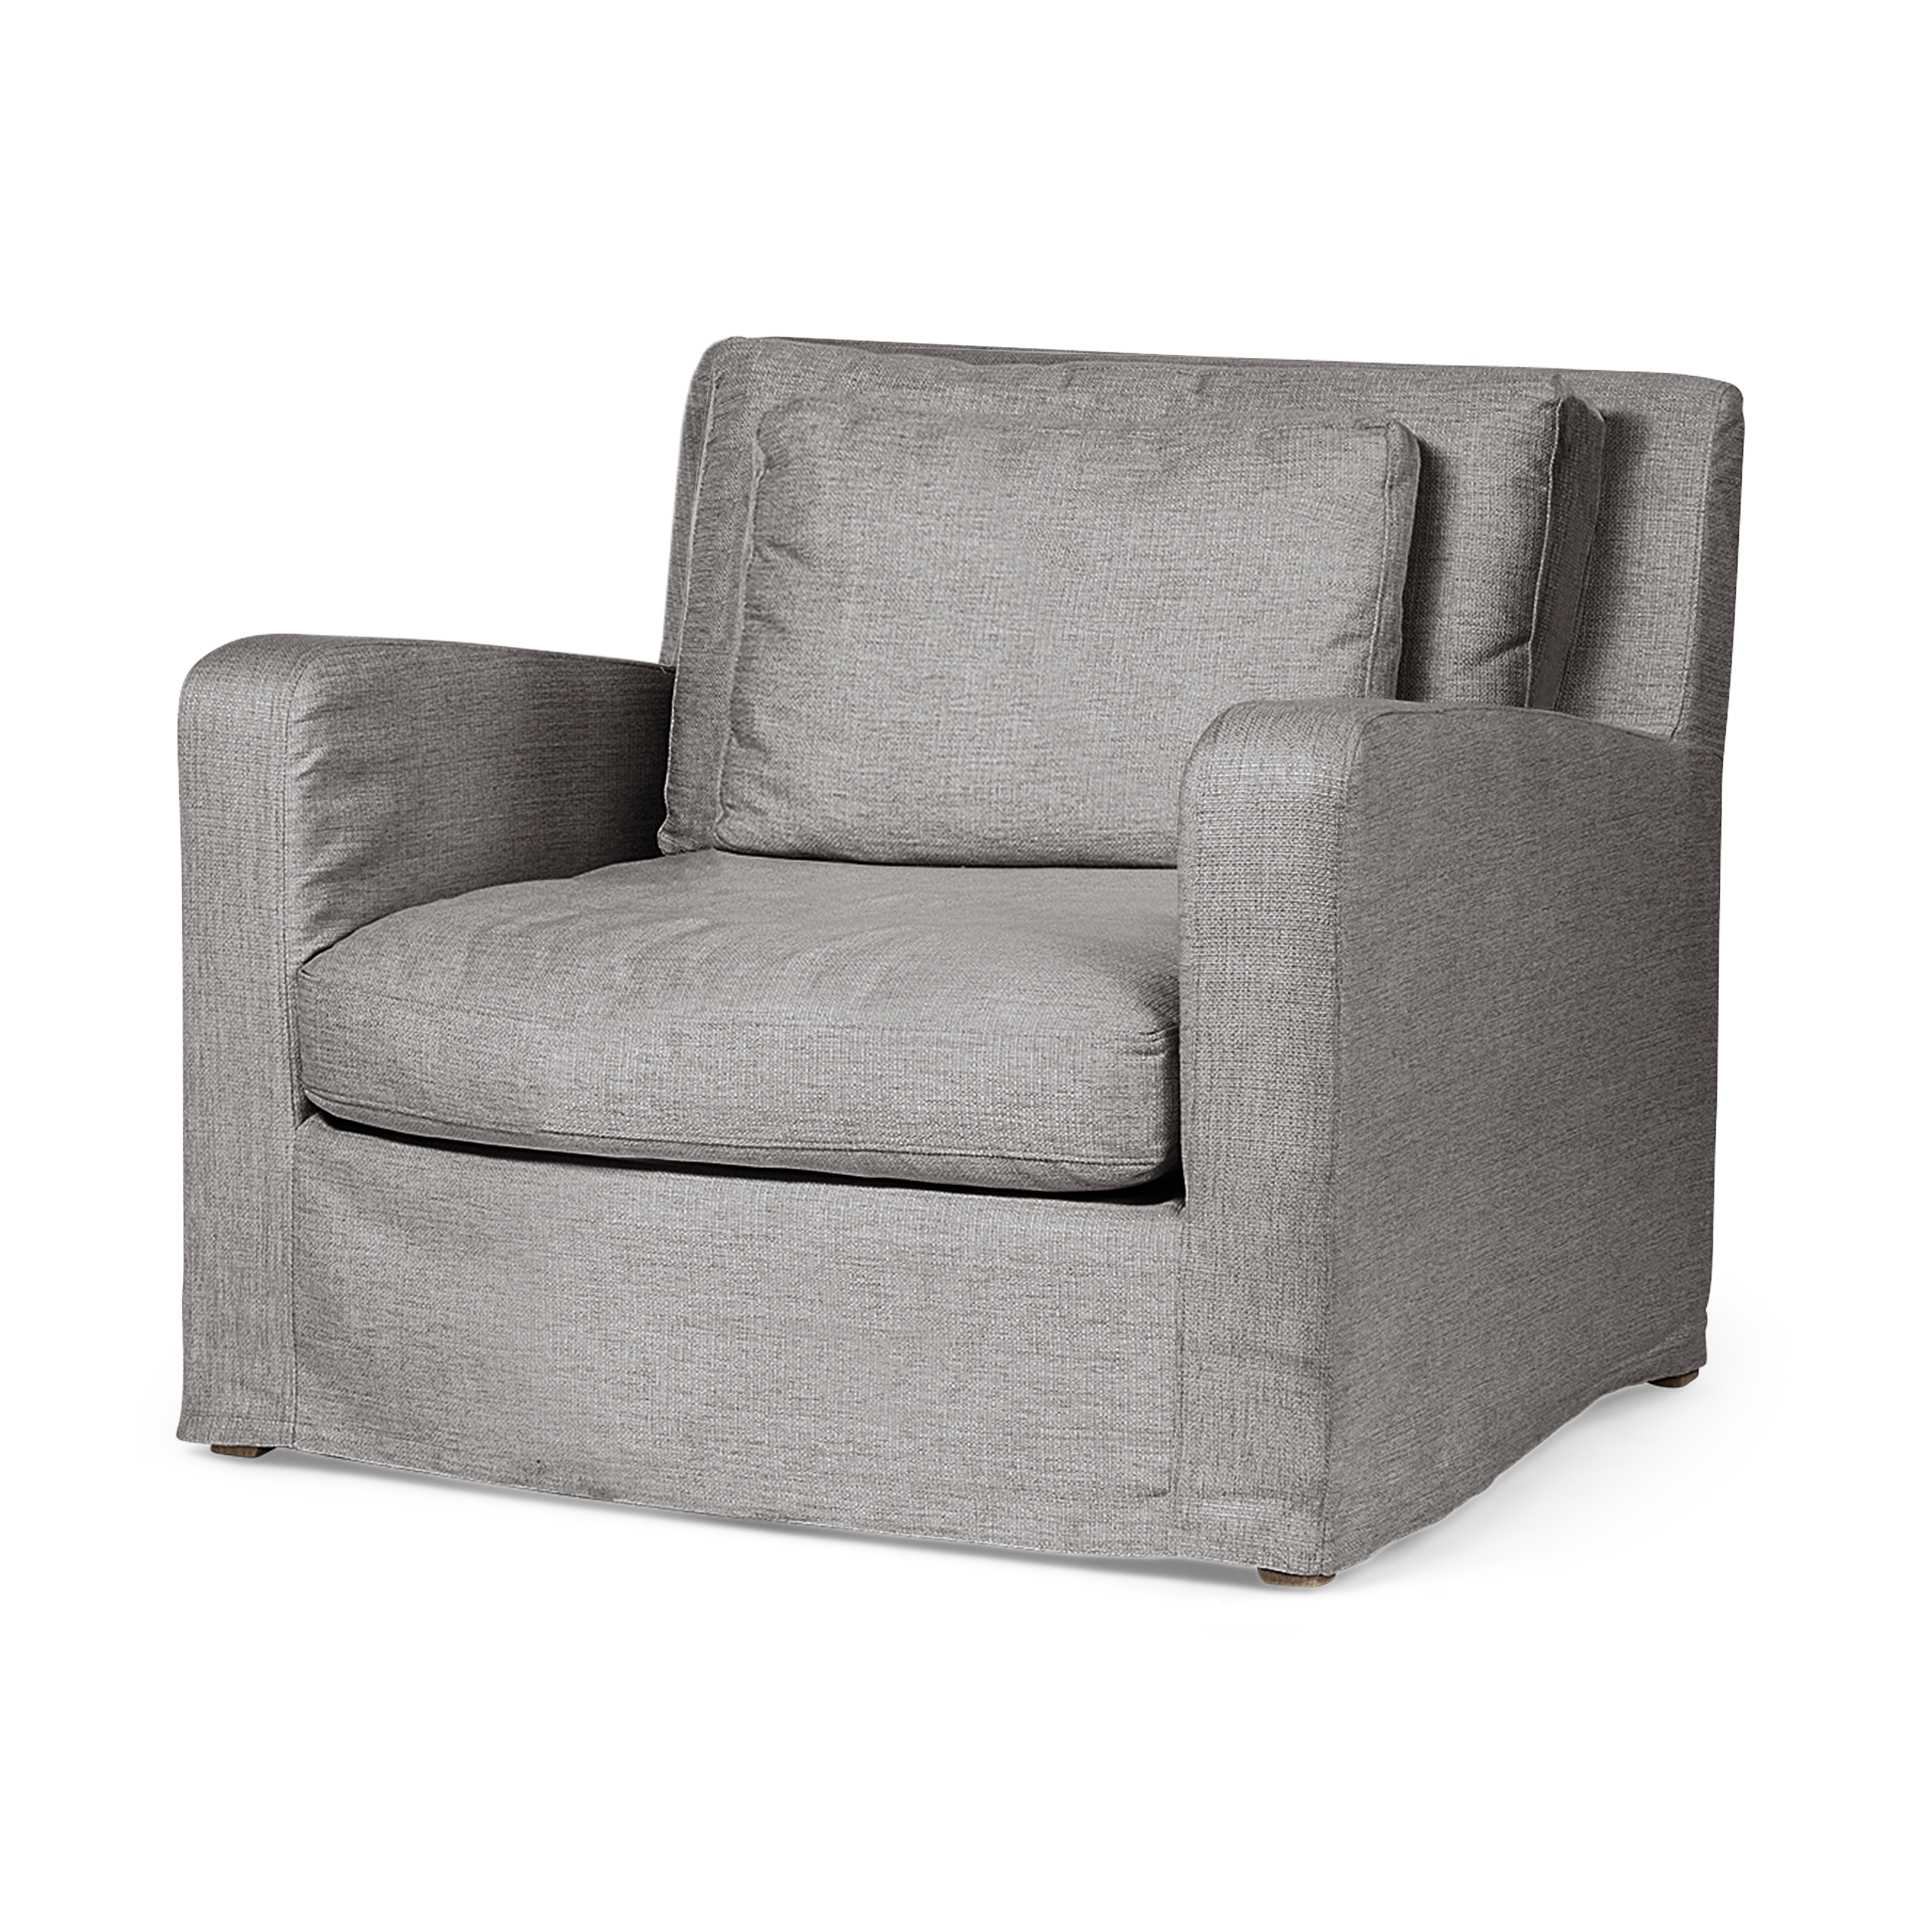 Flint Gray Slipcover Upholstered Fabric Seating Wide Accent chair w/ Wooden Frame and Legs